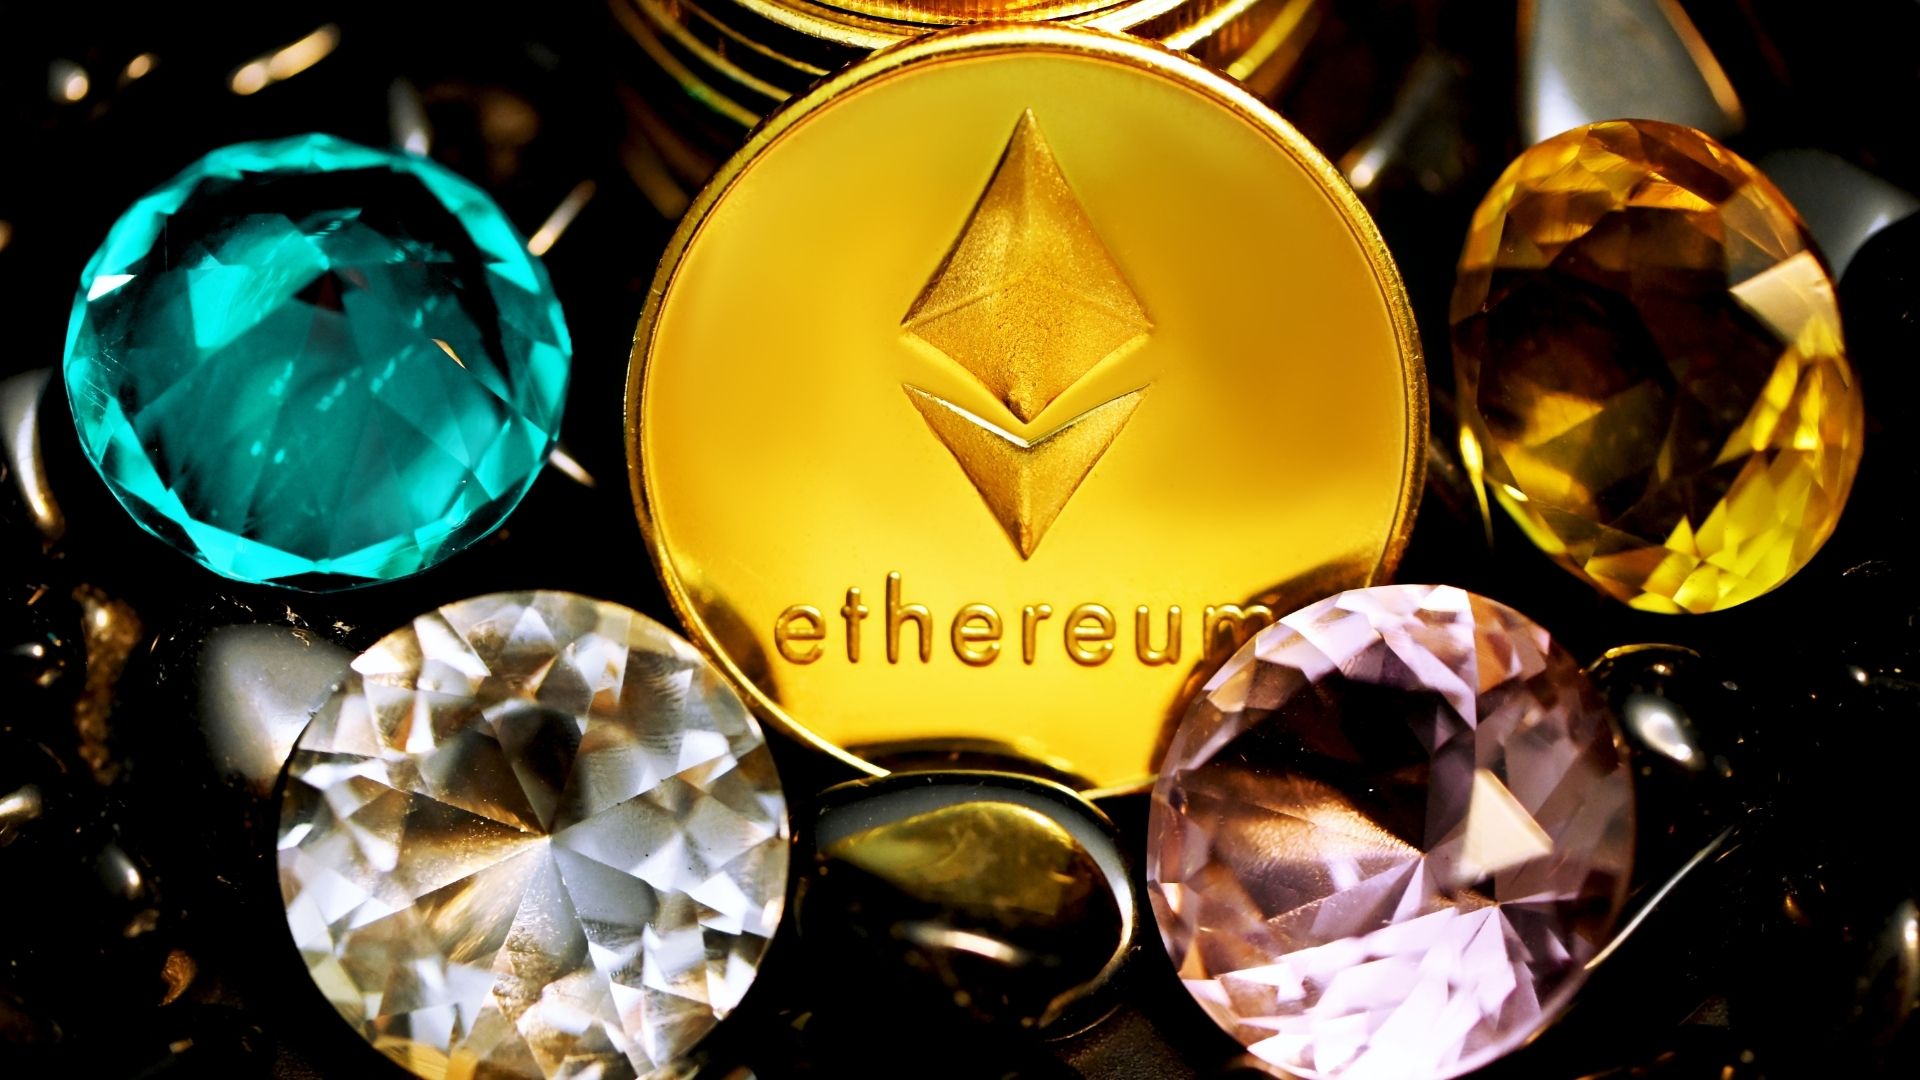 opportunity to bet with eth ethereum on casinos games